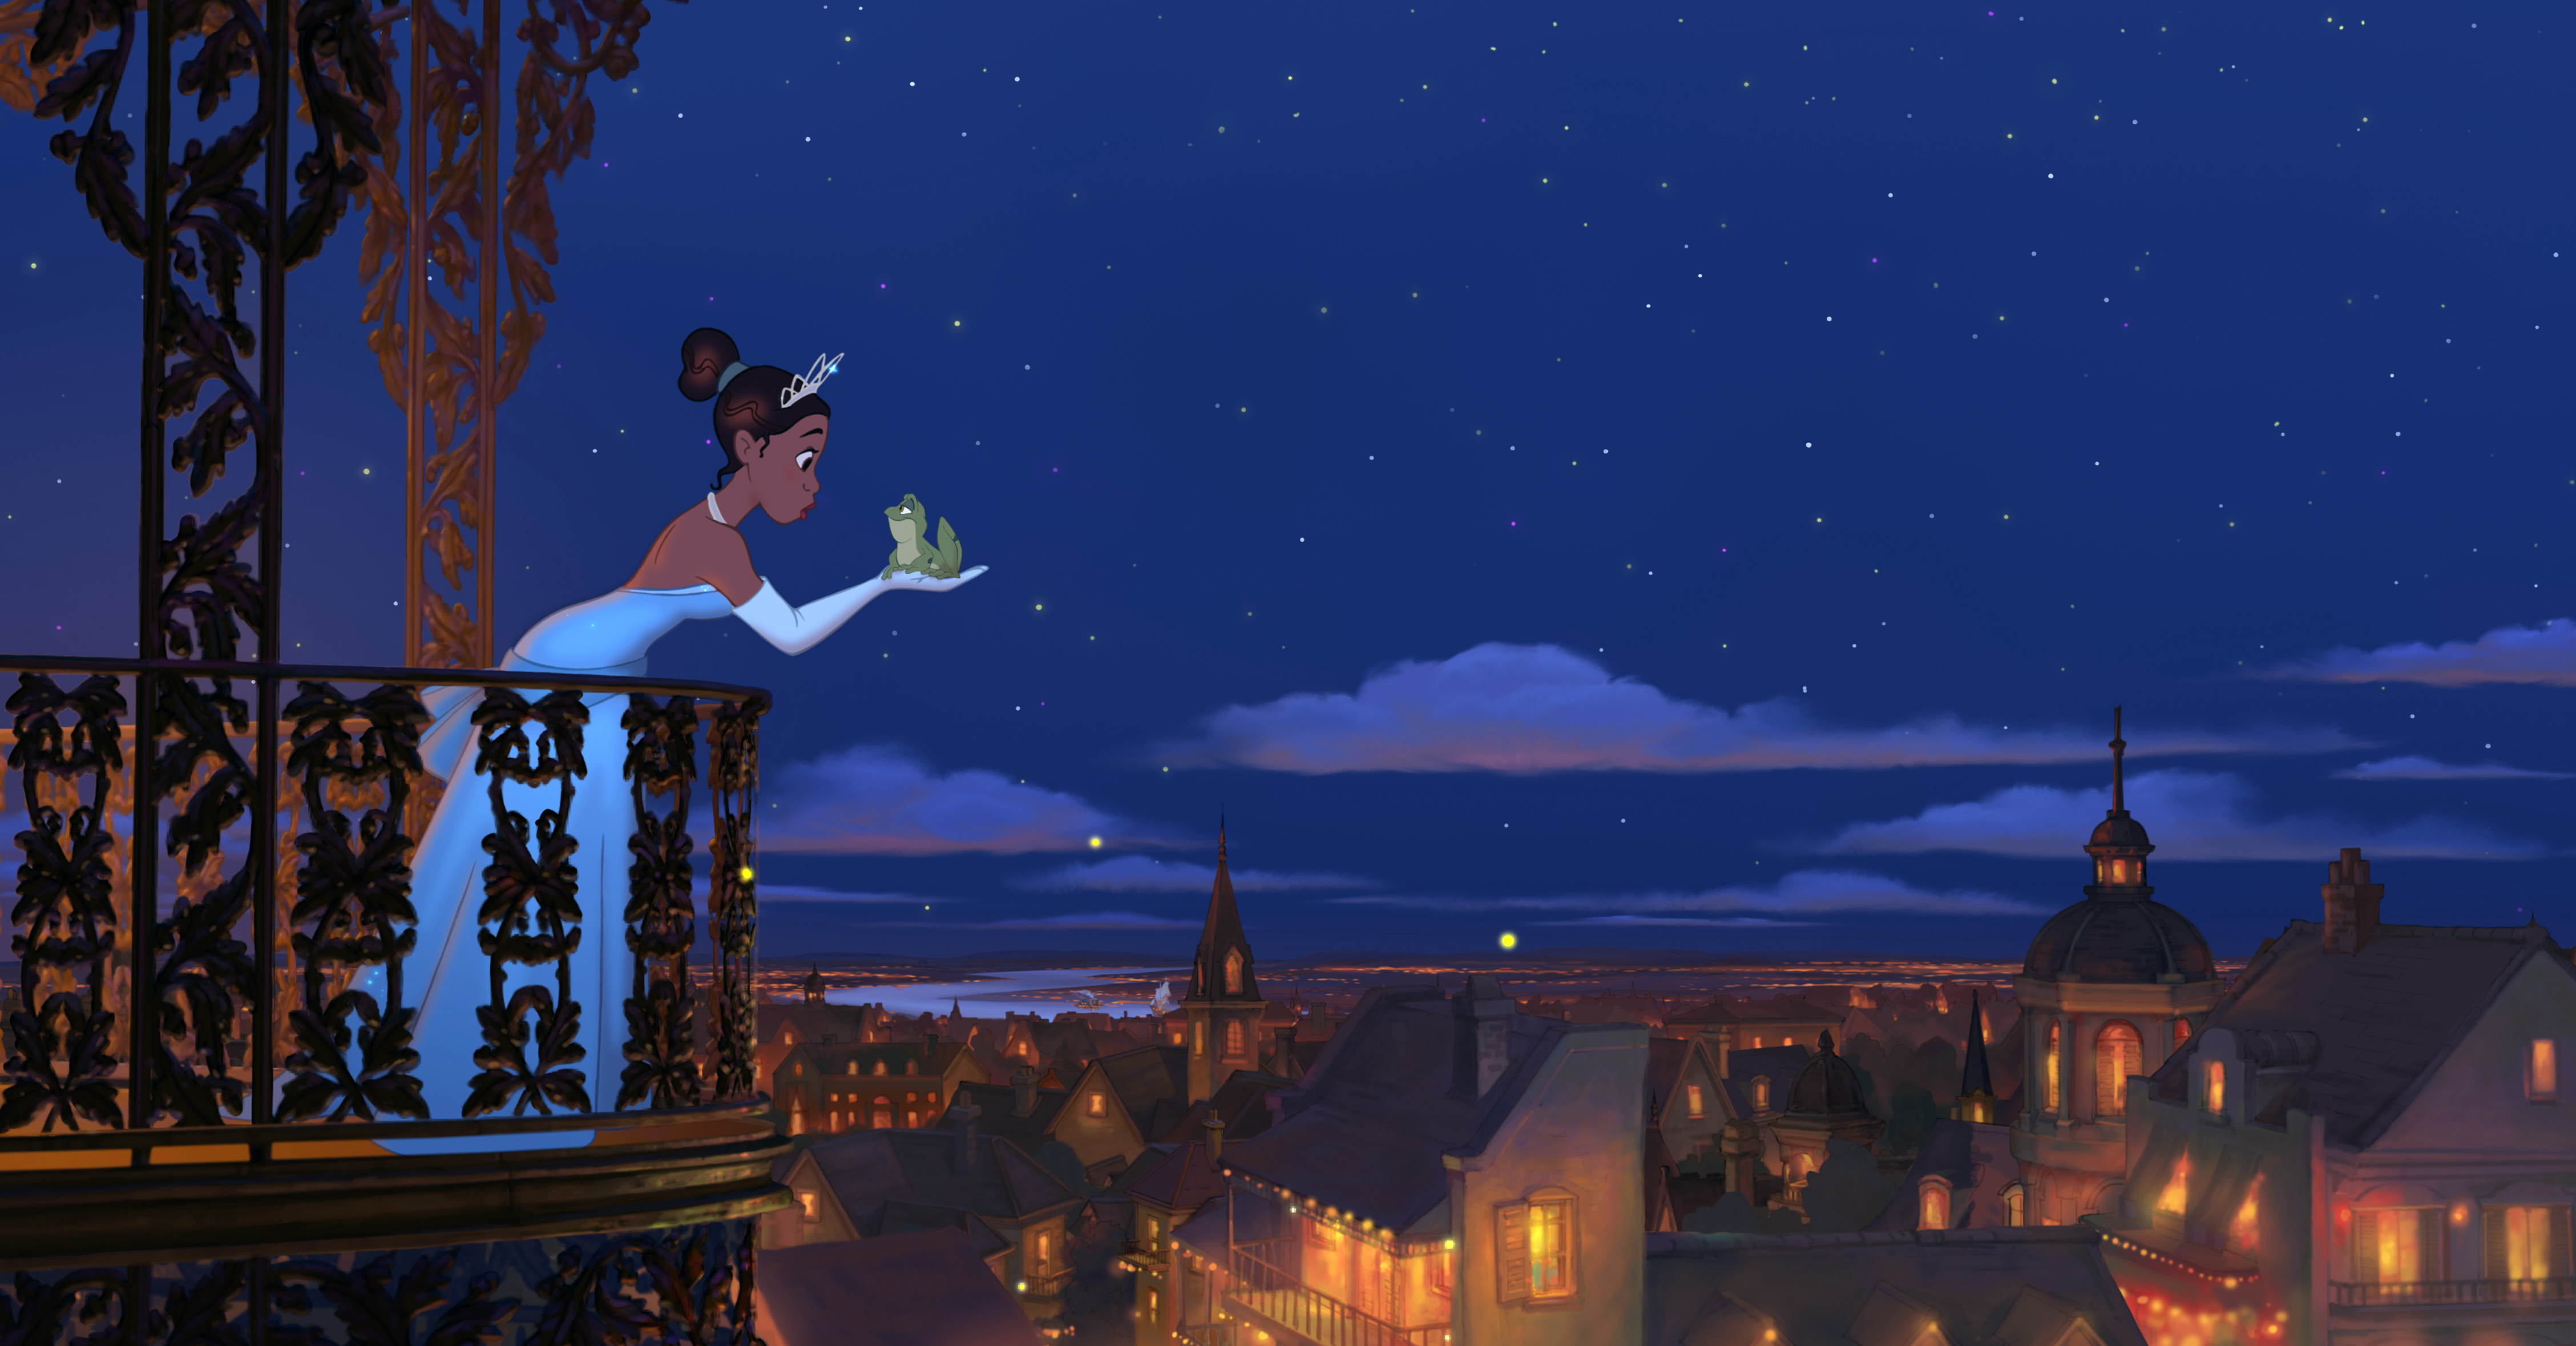 Movie The Princess And The Frog HD Wallpaper | Background Image